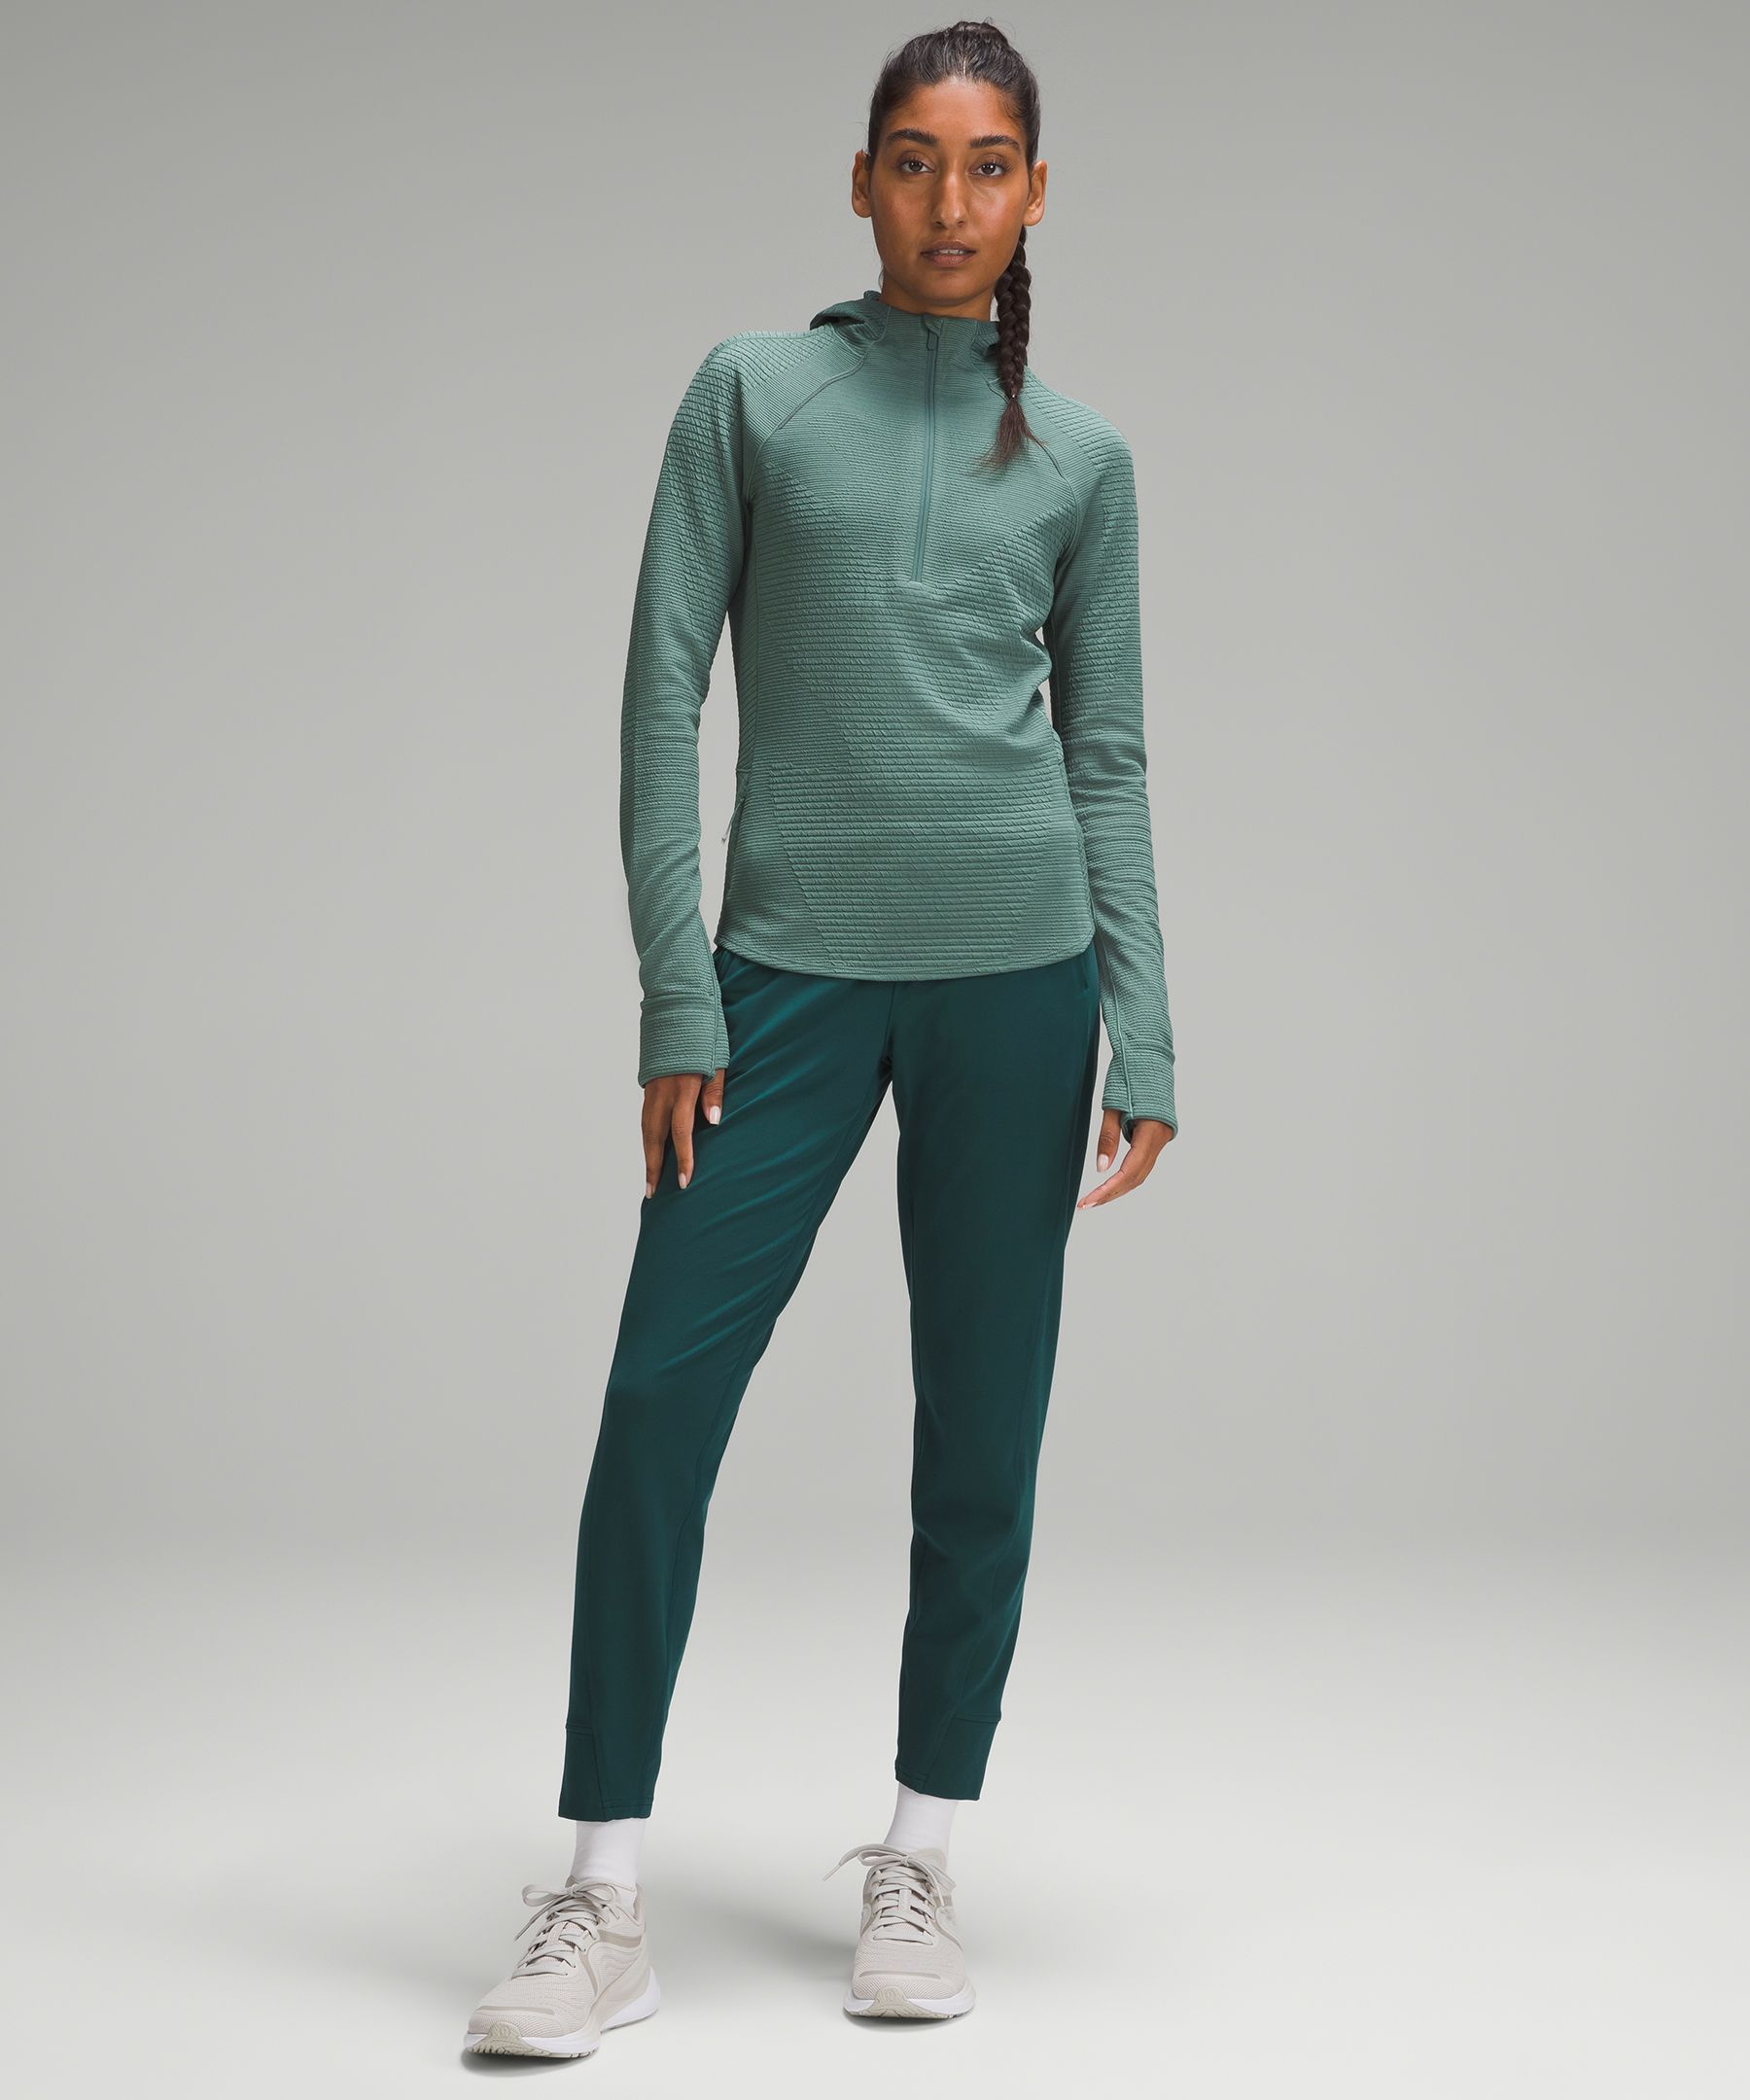 Lululemon Joggers Green Size 4 - $75 (36% Off Retail) - From Elise